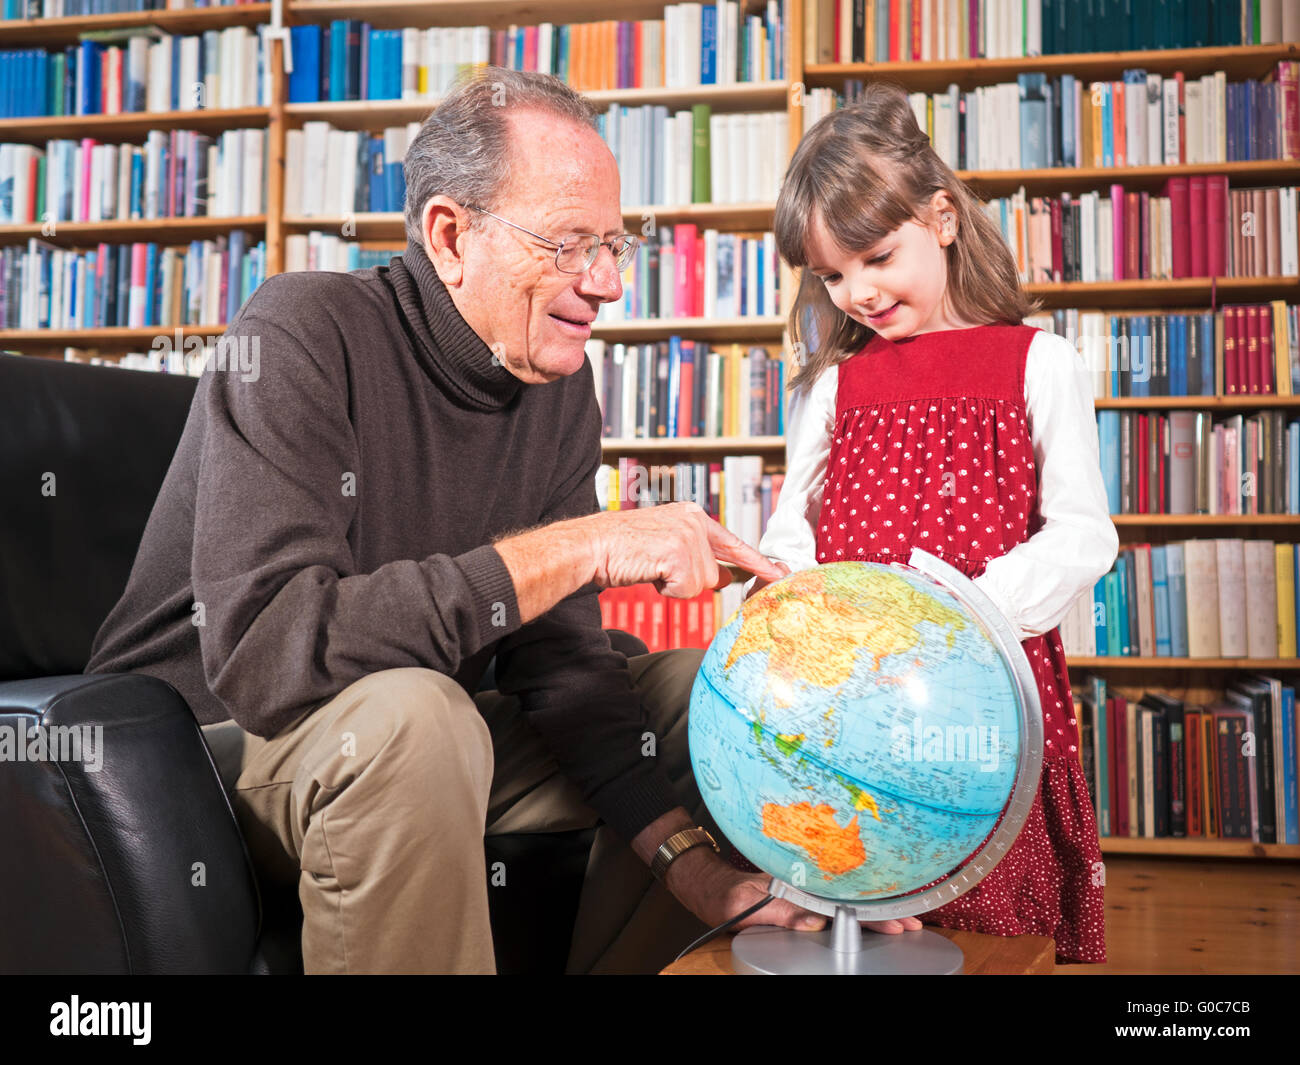 Grandfather and granddaughter looking at a globe Stock Photo